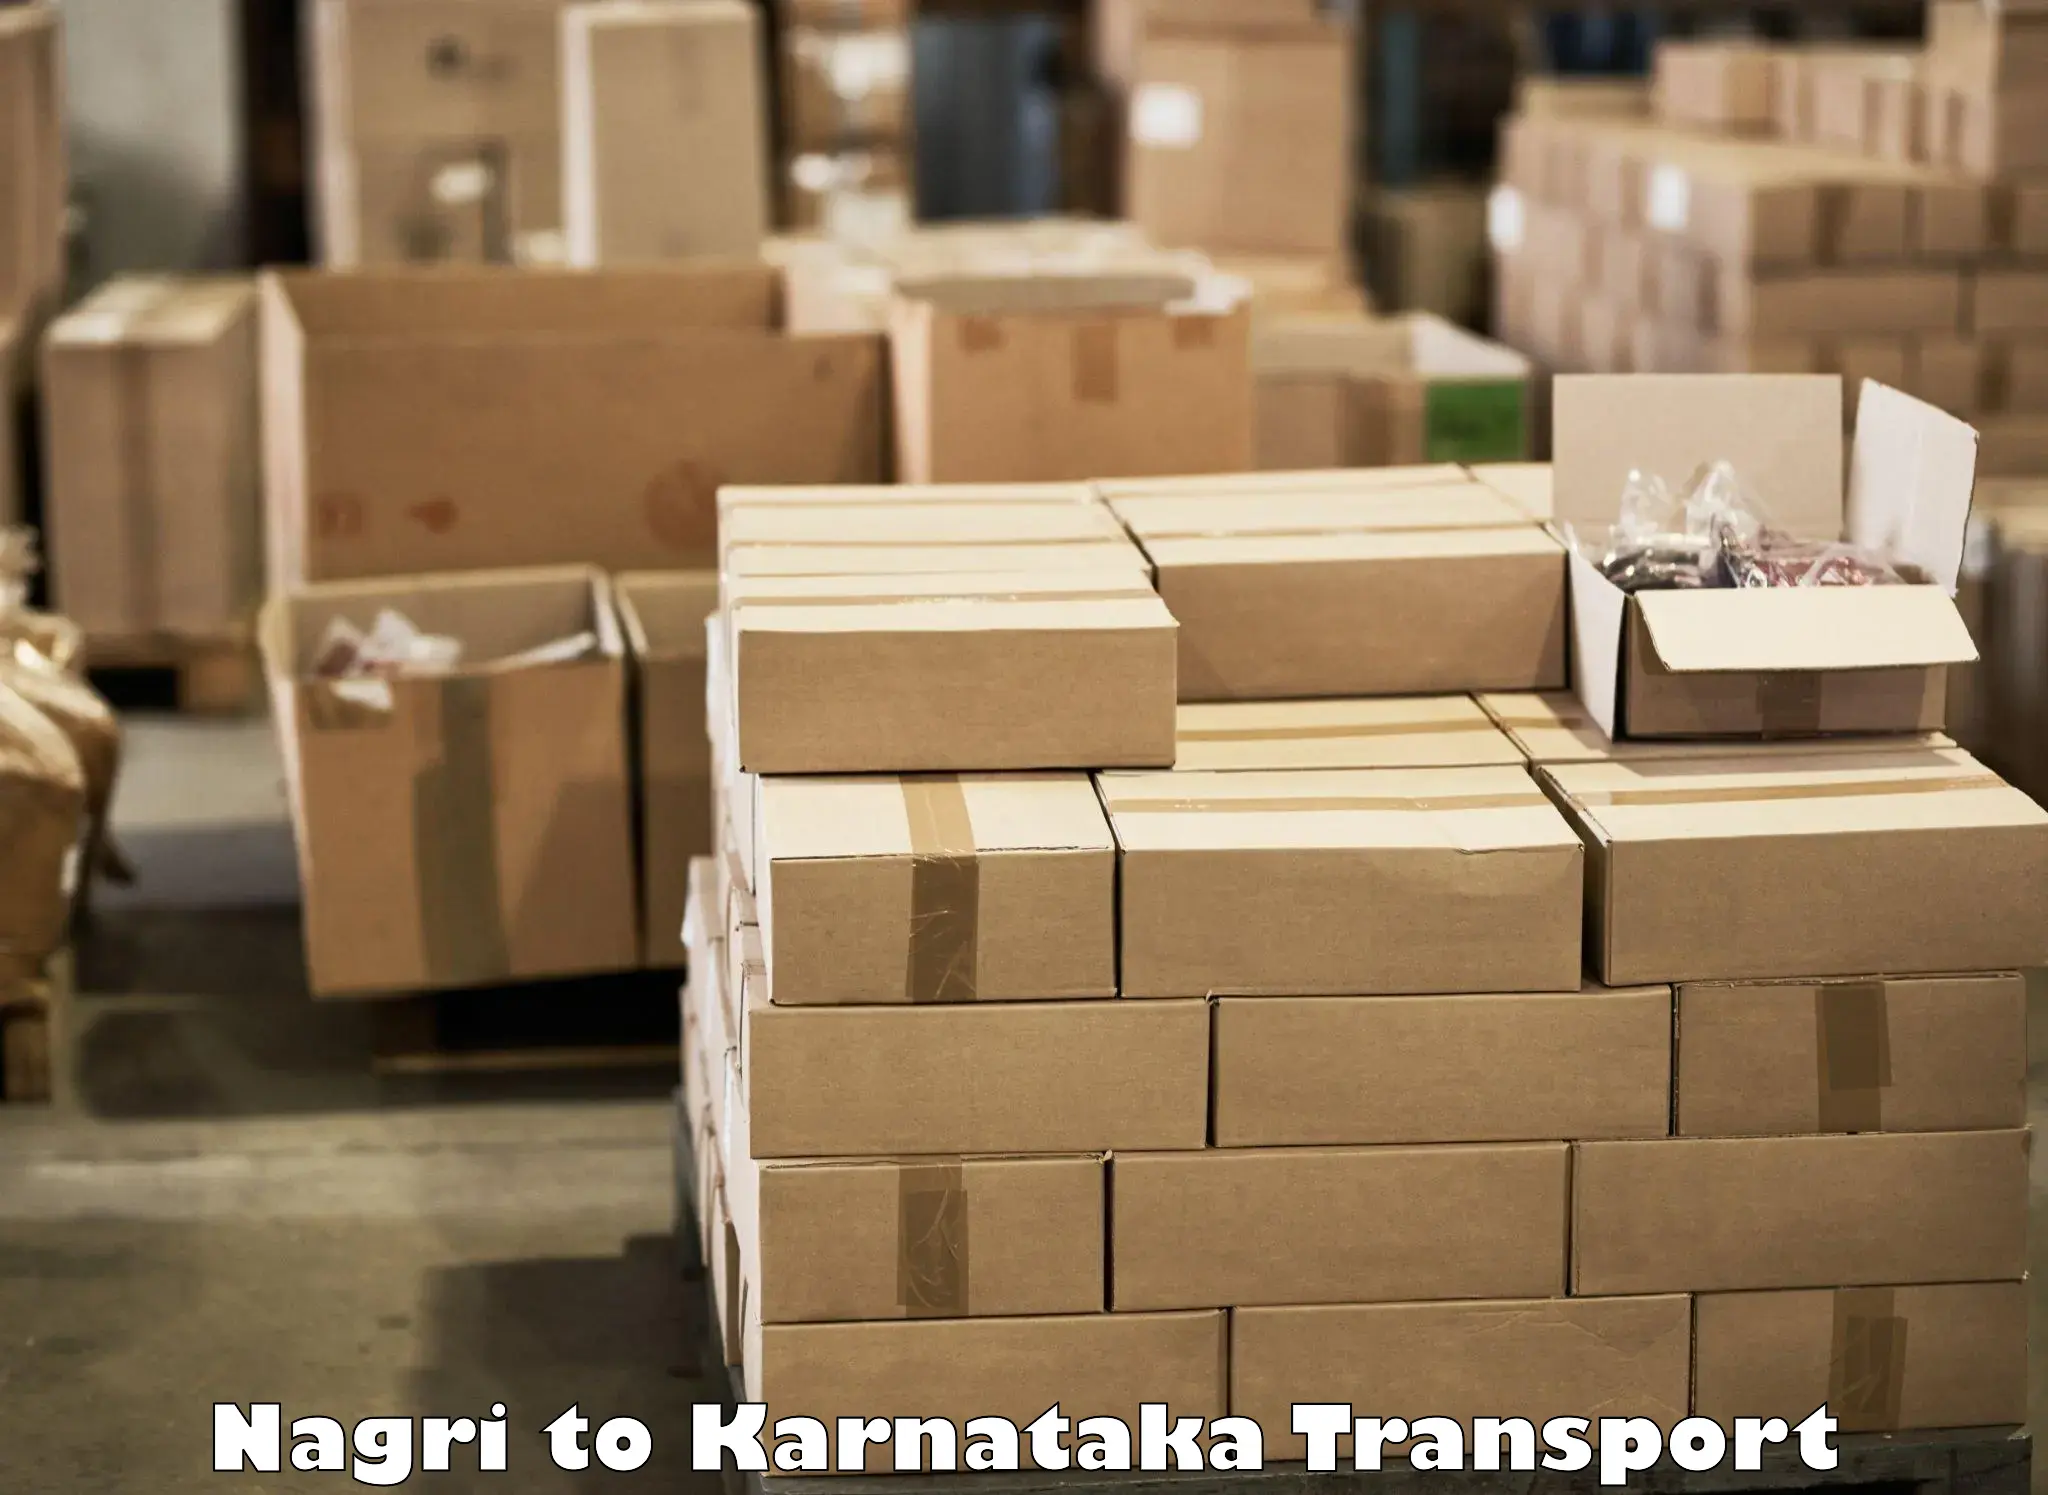 Vehicle transport services in Nagri to Devanahalli